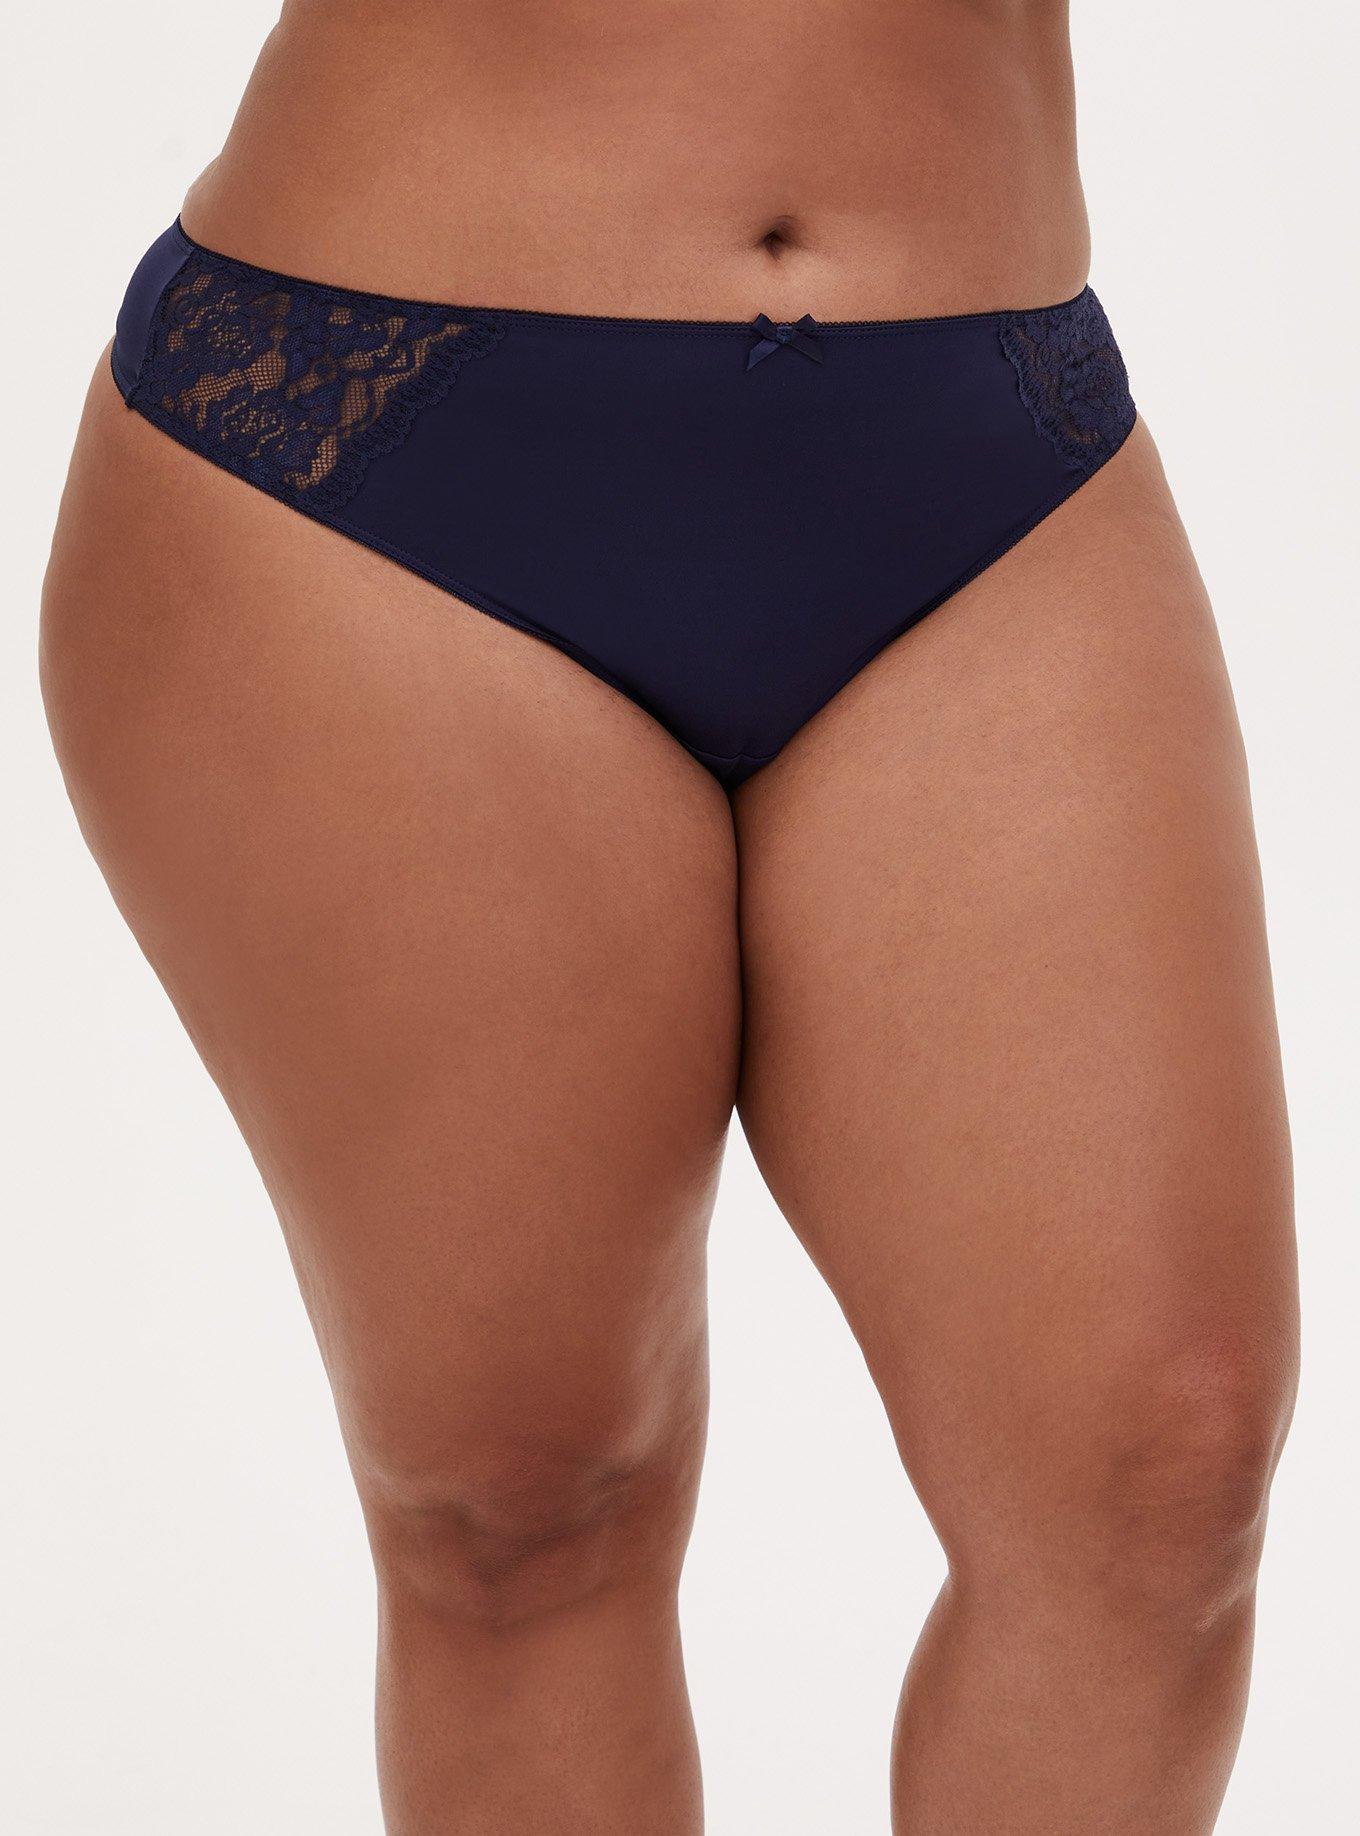 Plus Size - Microfiber And Lace Mid-Rise Thong Panty - Torrid